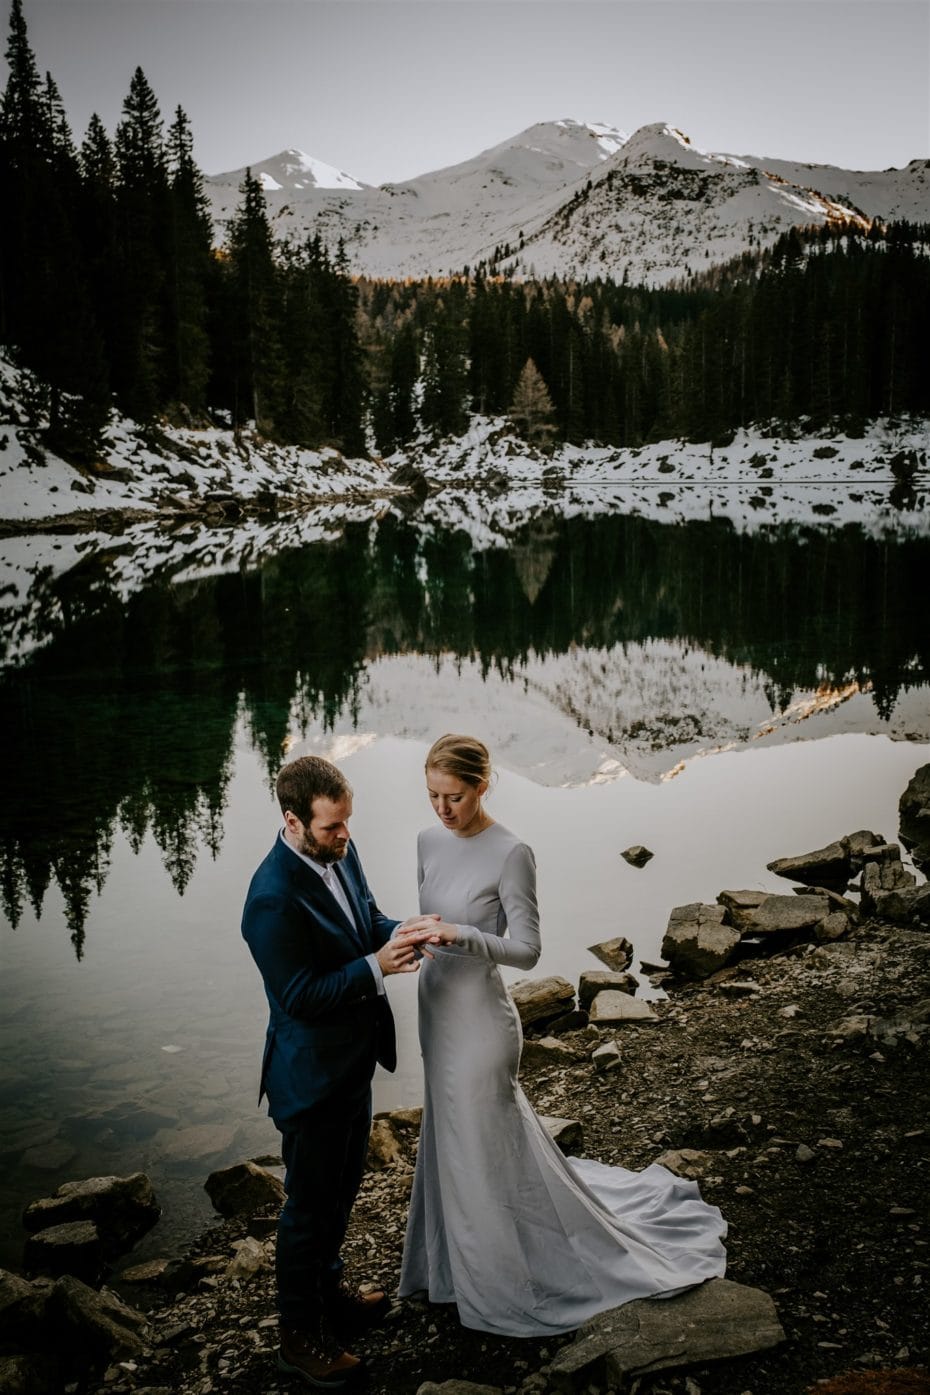 Winter mountain elopement in Innsbruck Austria, bride and groom exchange rings by a lake with snow capped mountains in the distance